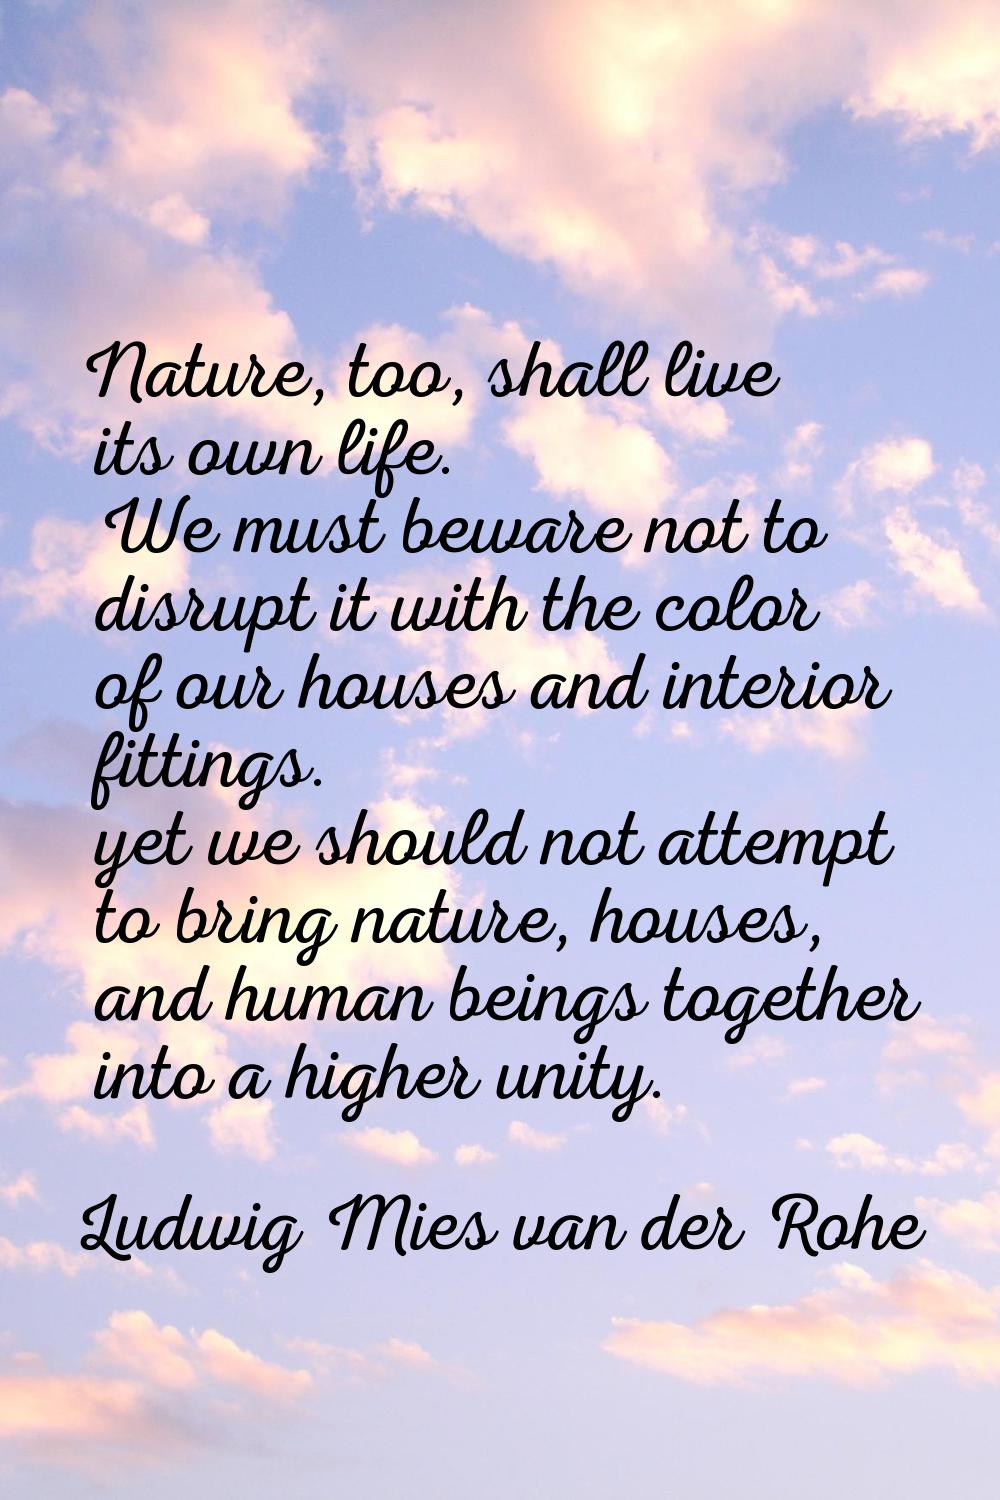 Nature, too, shall live its own life. We must beware not to disrupt it with the color of our houses